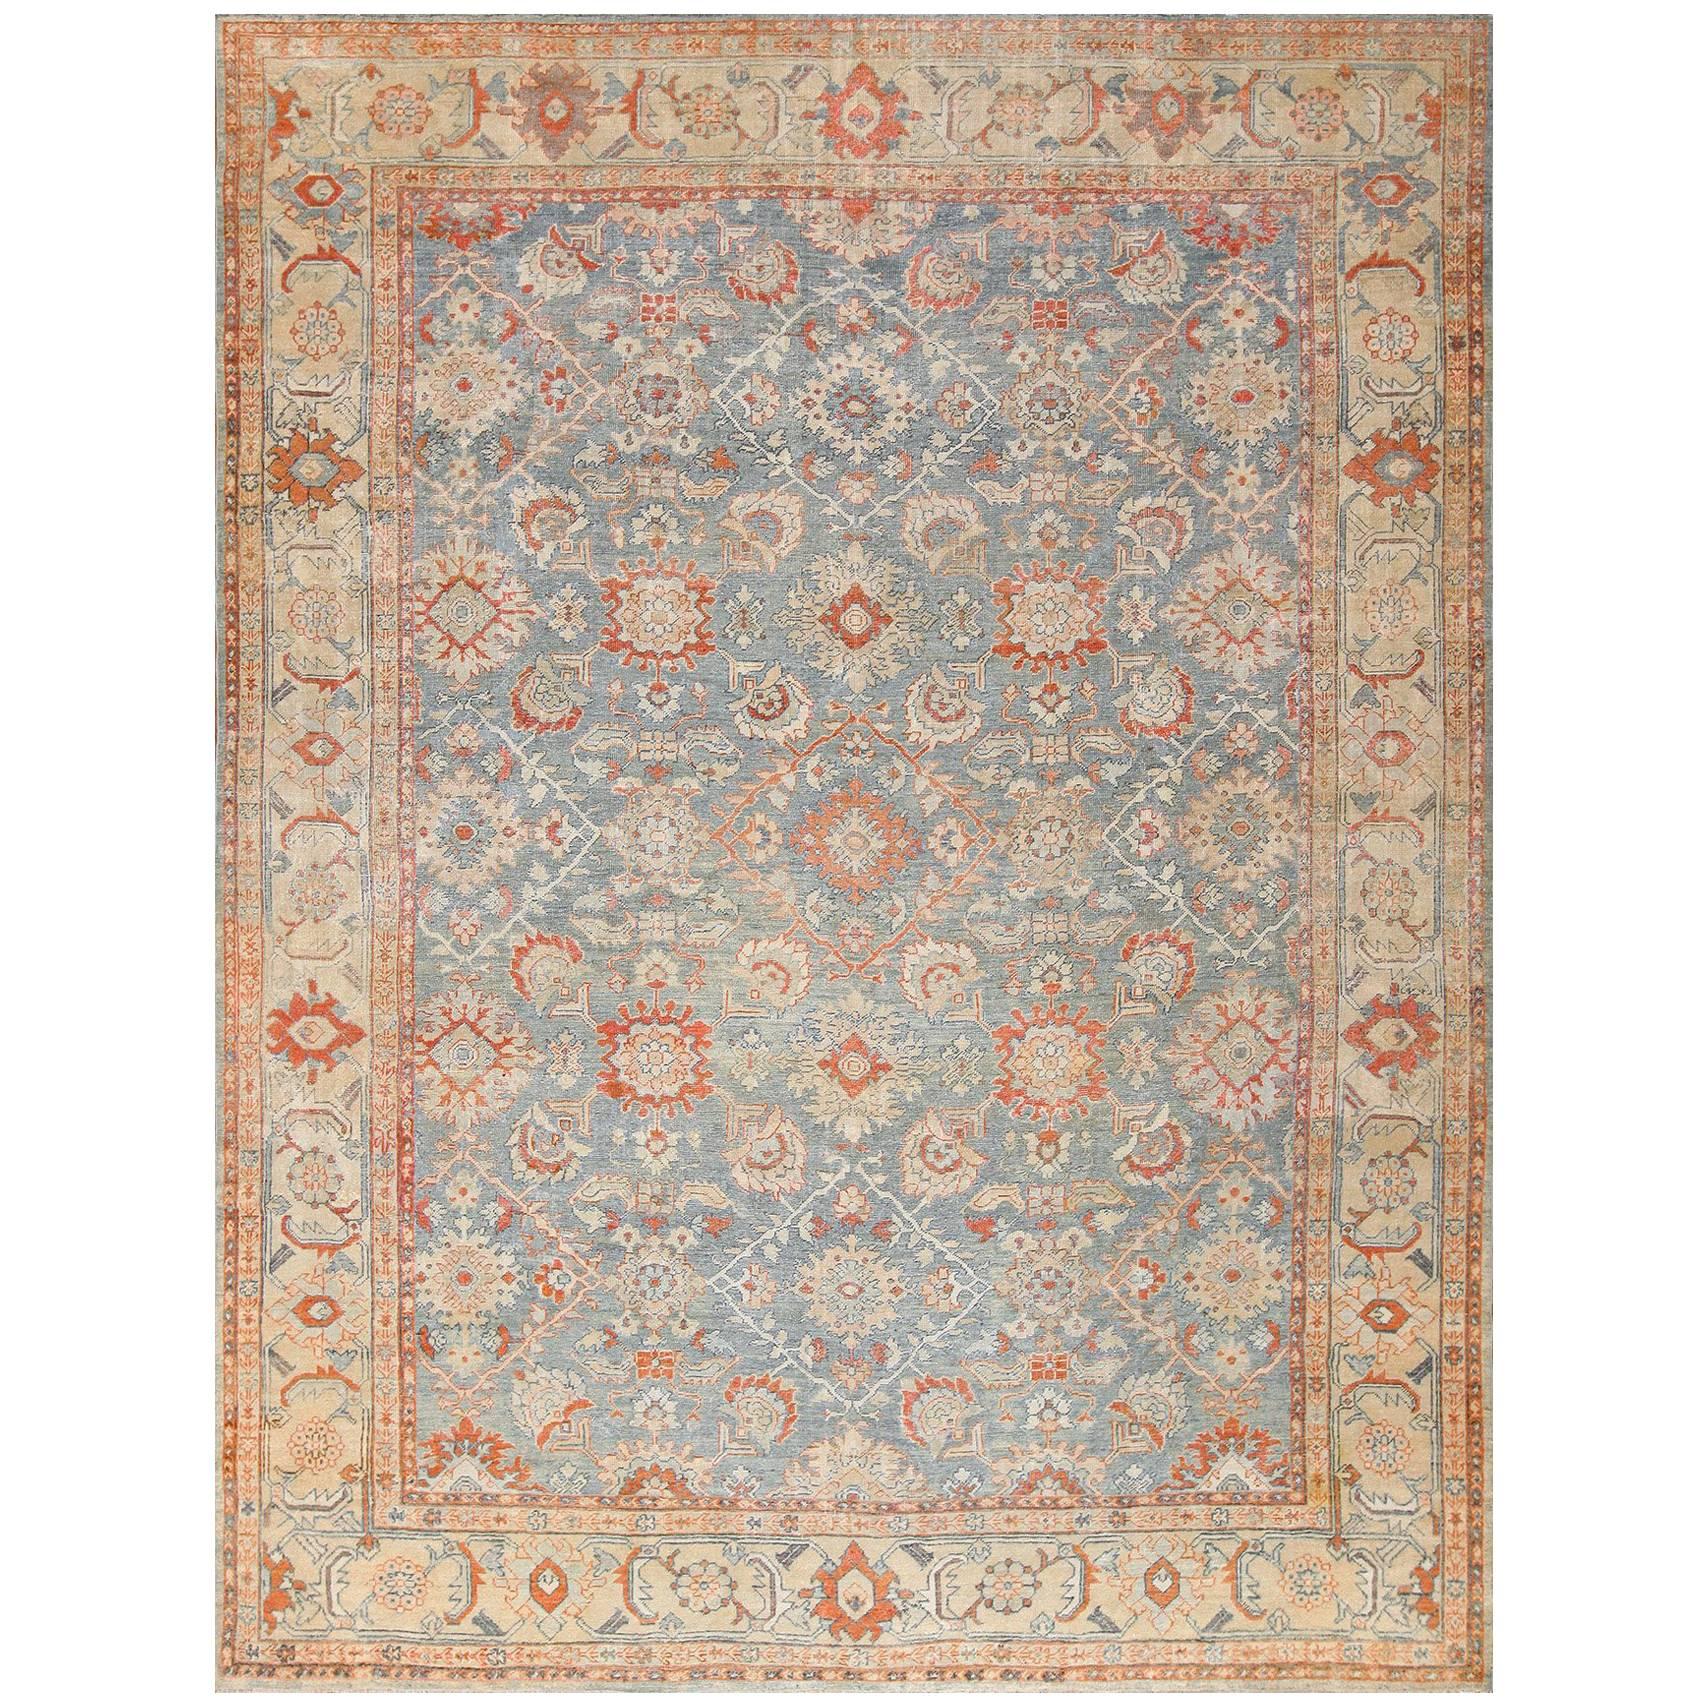 Grayish Background Antique Sultanabad Persian Rug